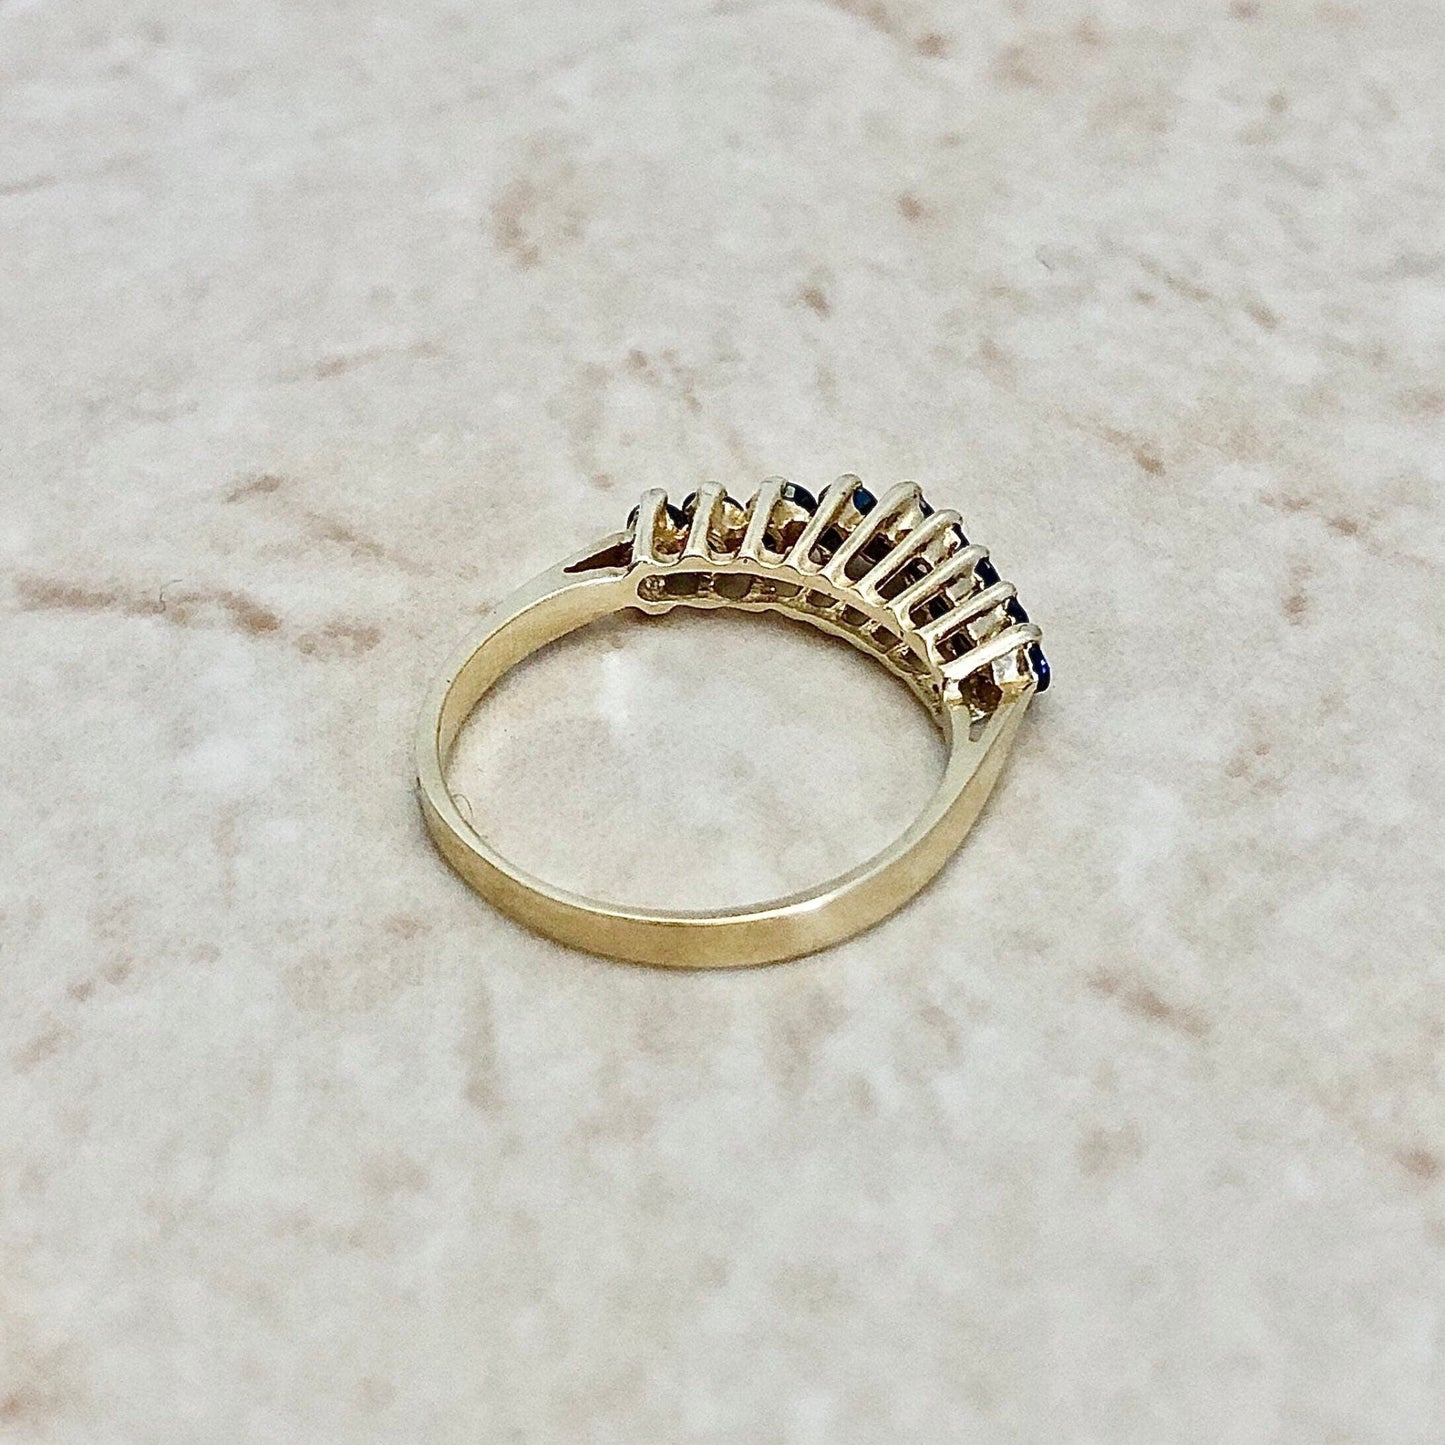 Vintage 14K Natural Sapphire Band - Yellow Gold - Genuine Gemstone Ring - Size 5.75 US - Birthday Gift For Her - September Birthstone